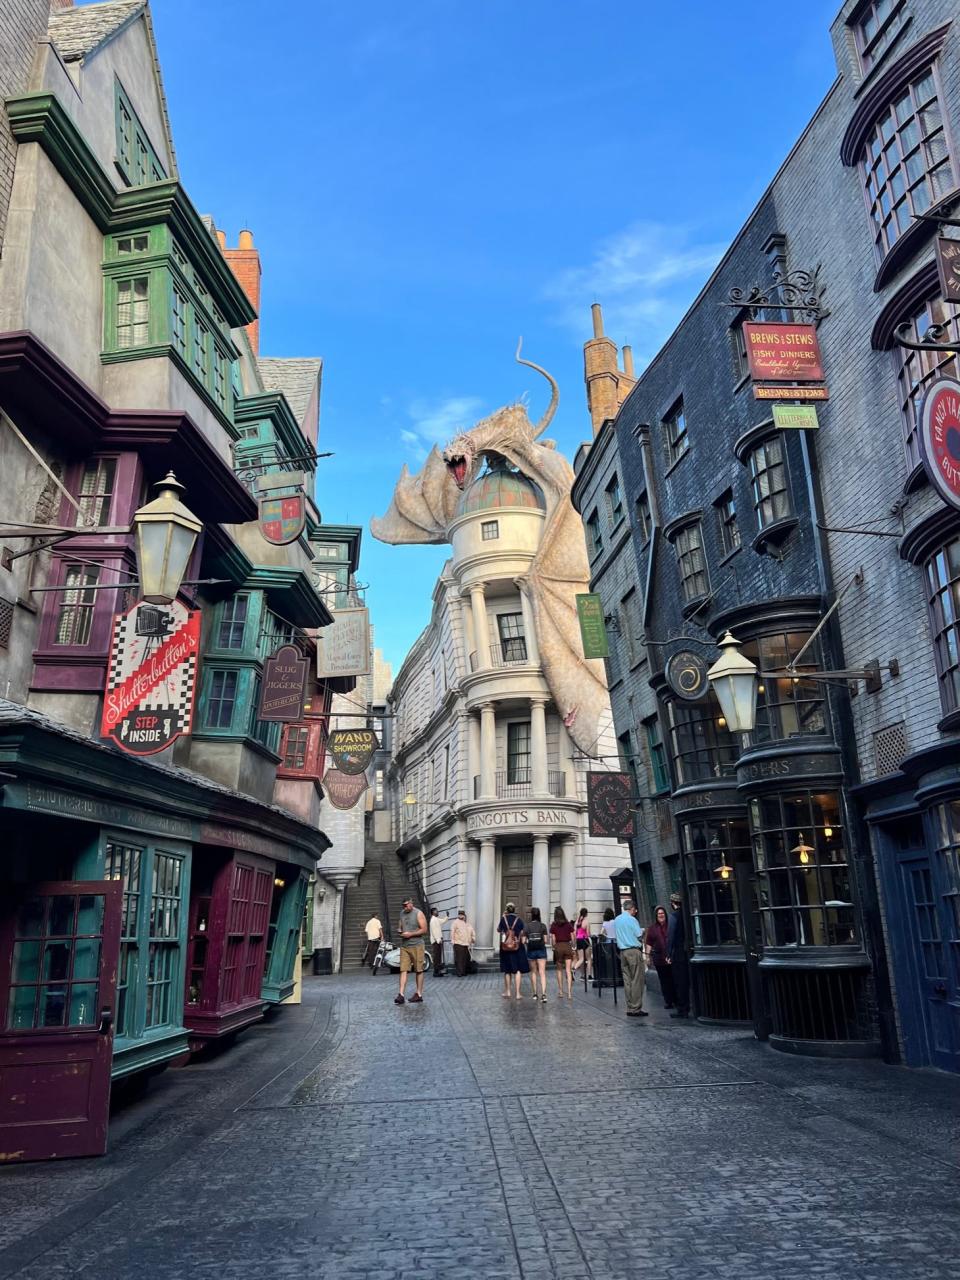 Only Universal Studios Florida's Wizarding World of Harry Potter invites guests to explore Diagon Alley.